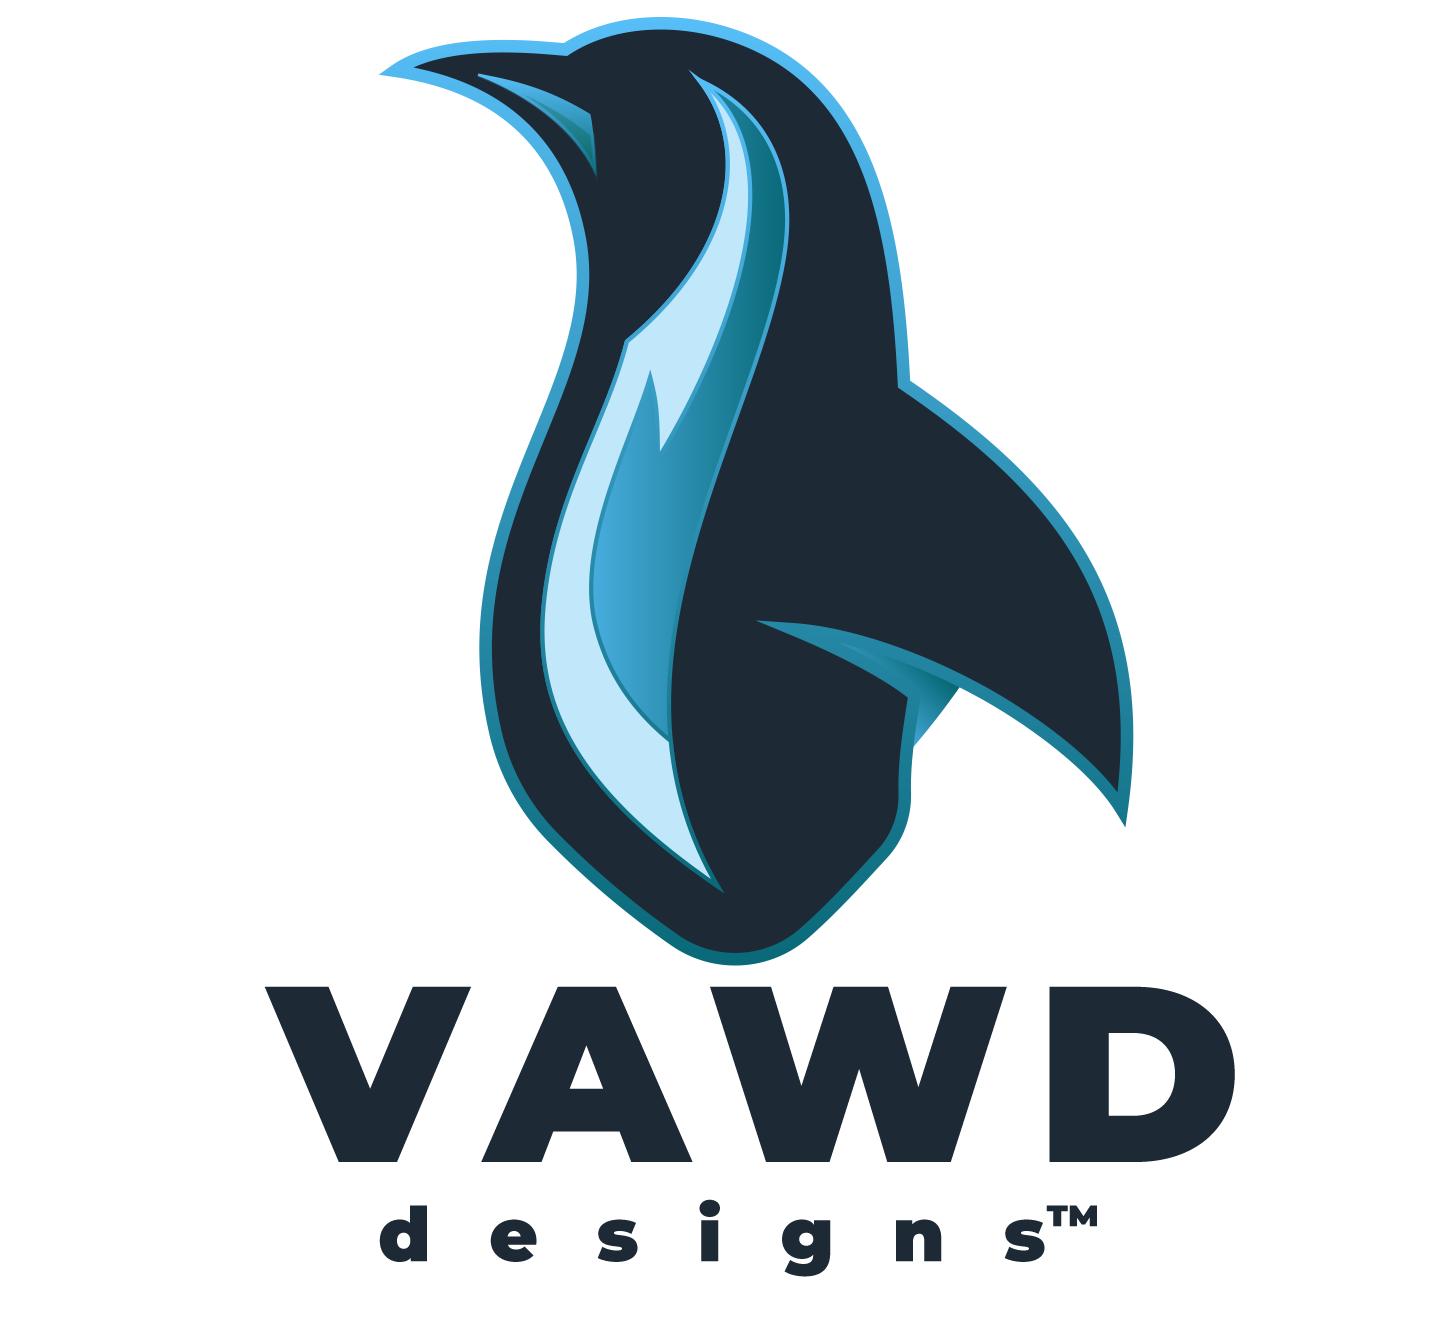 the logo for vawd designs